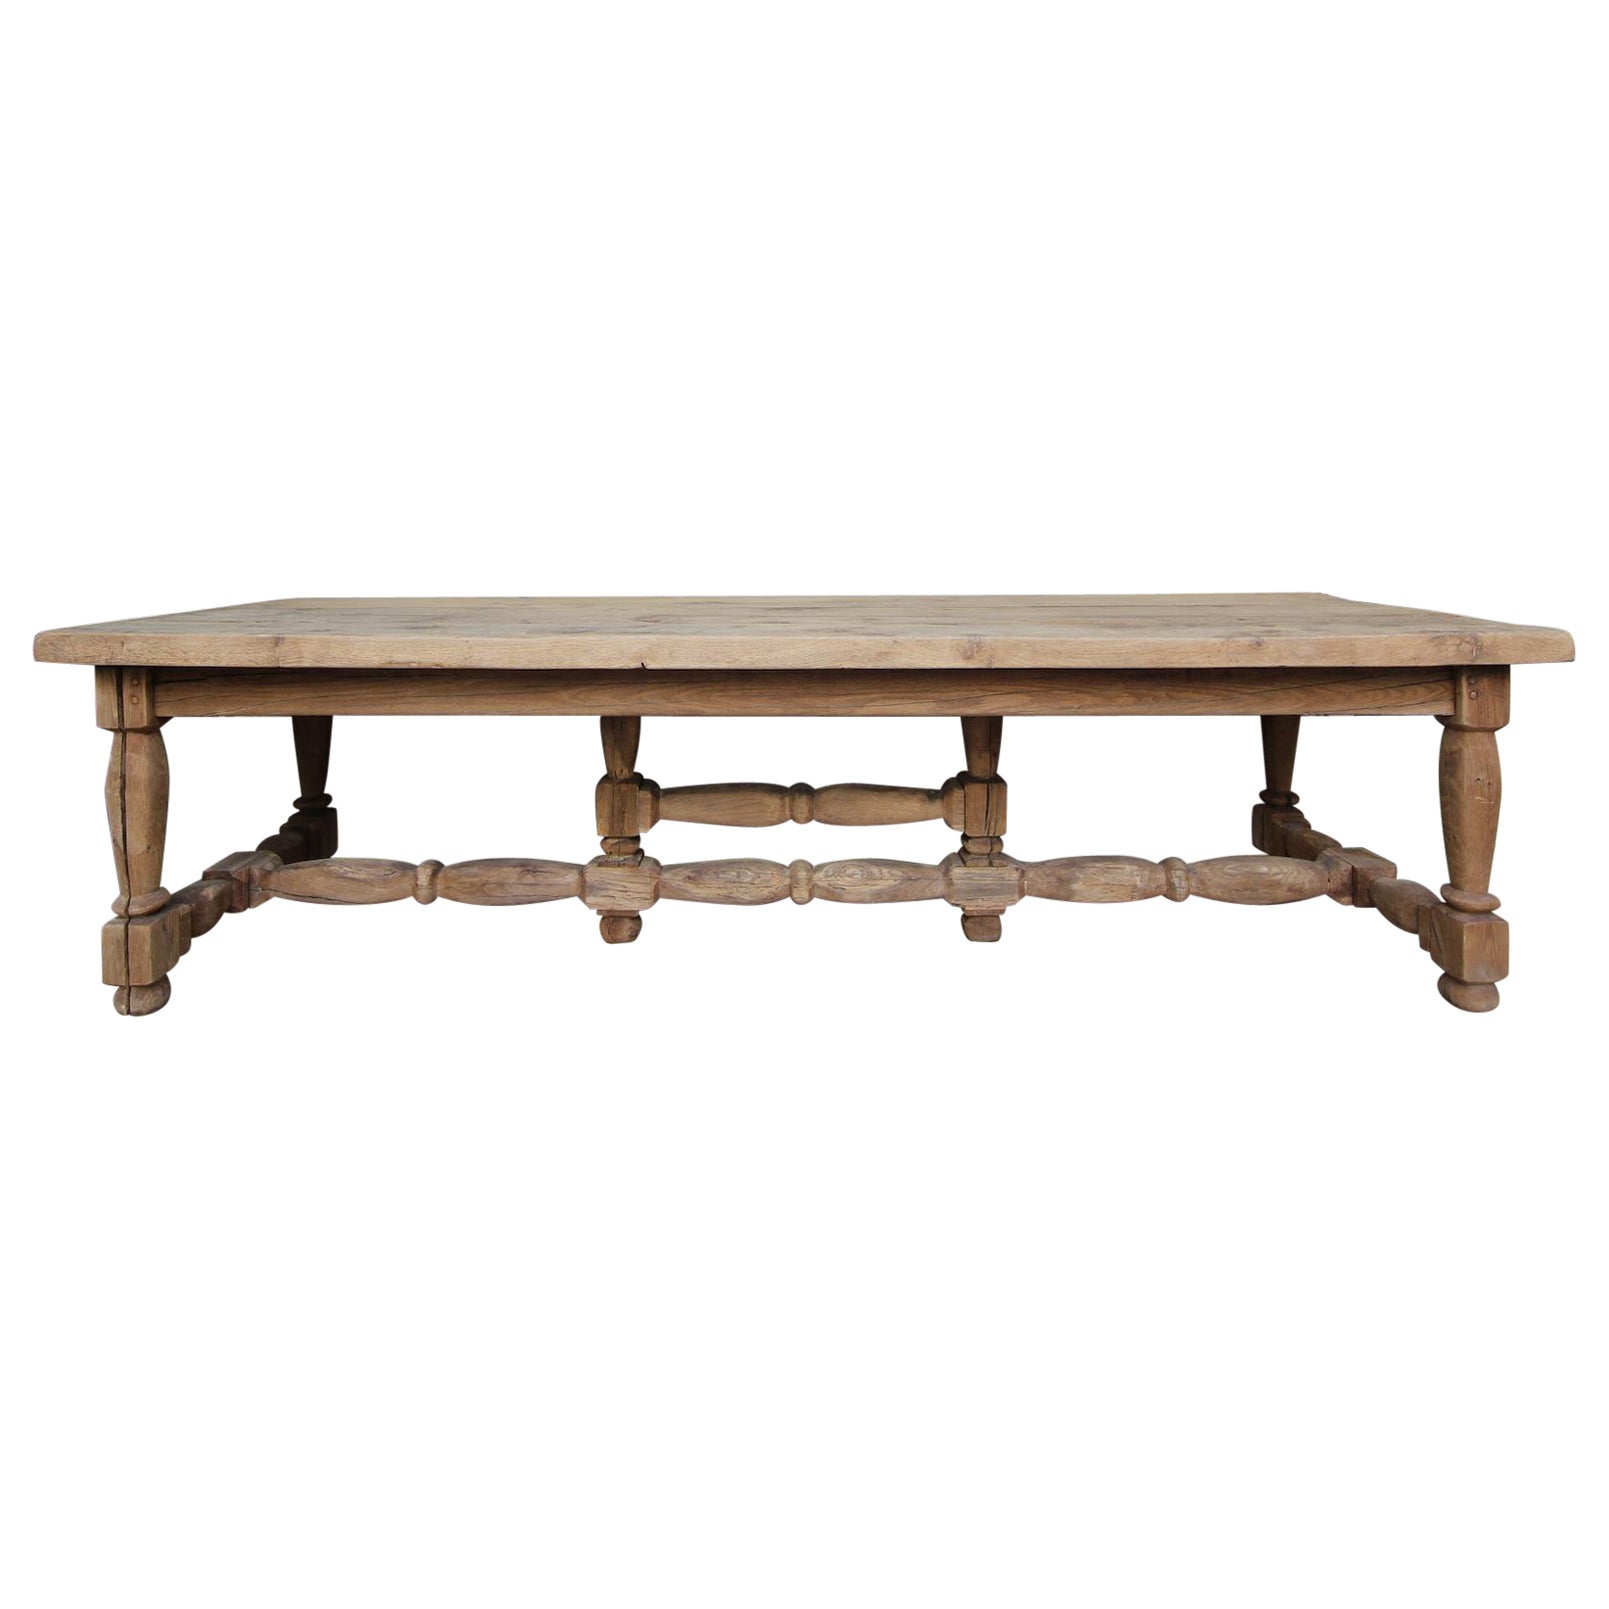 Large Stripped Oak Monastery Table